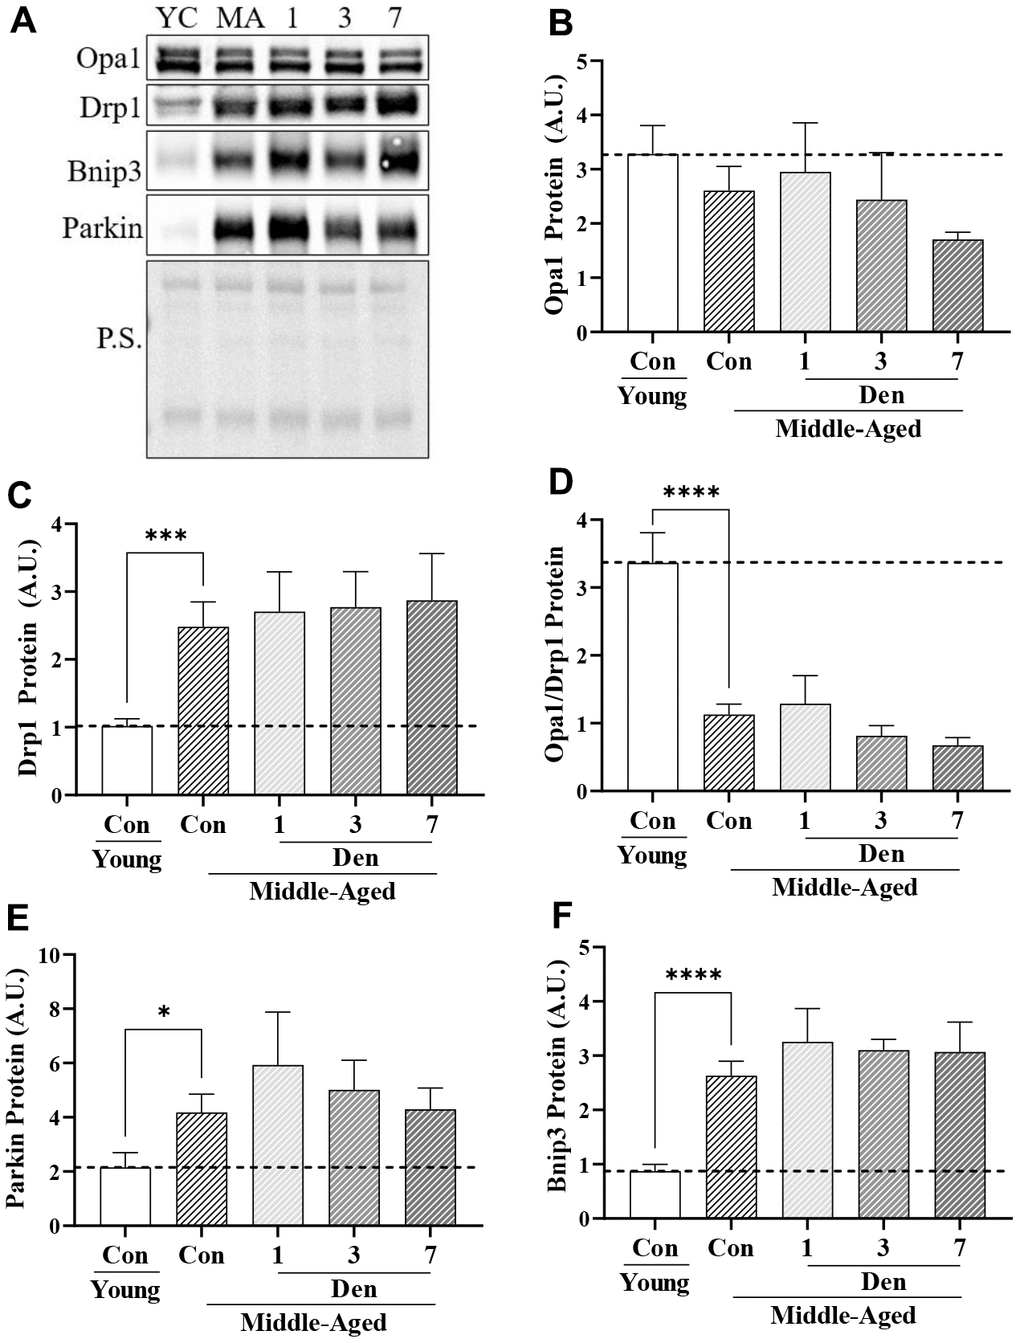 Proteins related to mitochondrial dynamics and mitophagy in young and middle-aged control and denervated skeletal muscle. (A) Representative western blots for Opa1, Drp1, Bnip3 and Parkin proteins in skeletal muscle samples. Quantification of (B) Opa1 protein; (C) Drp1 protein; (D) Opa1/Drp1 protein; (E) Parkin protein; and (F) Bnip3 protein. *p